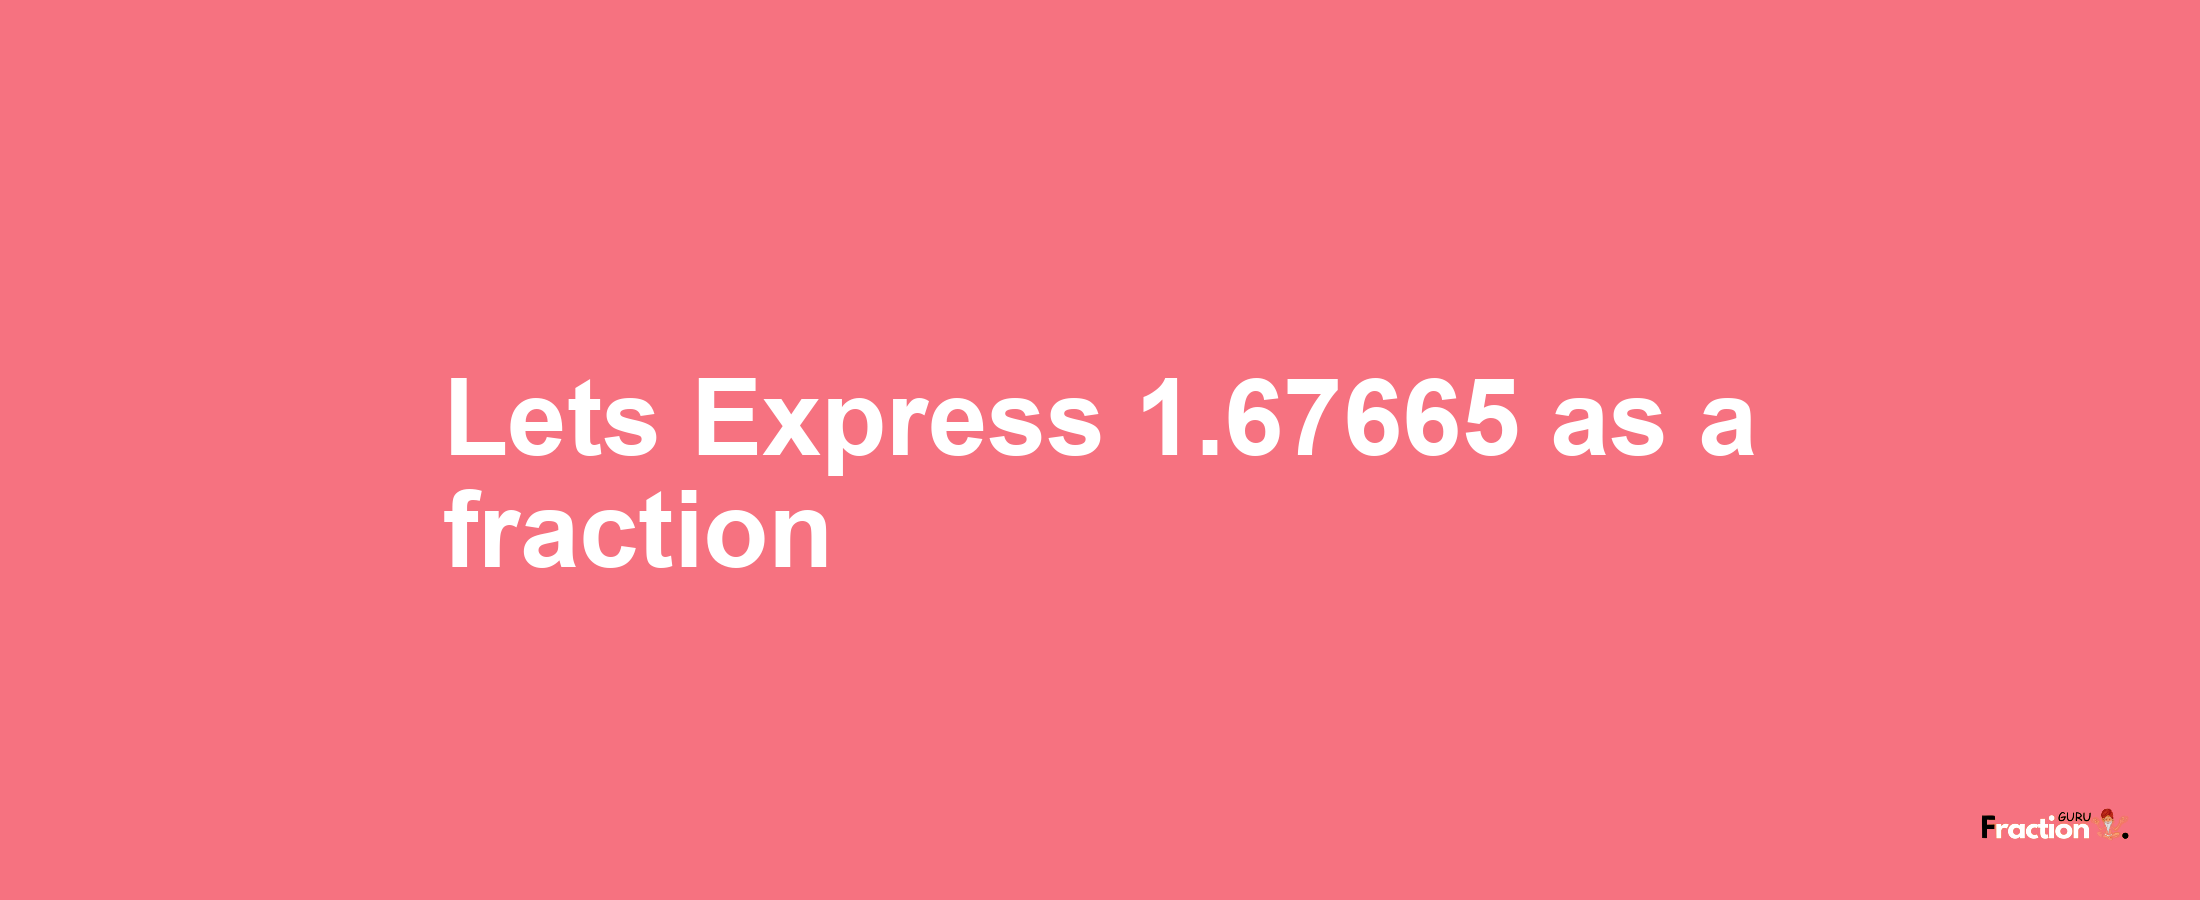 Lets Express 1.67665 as afraction